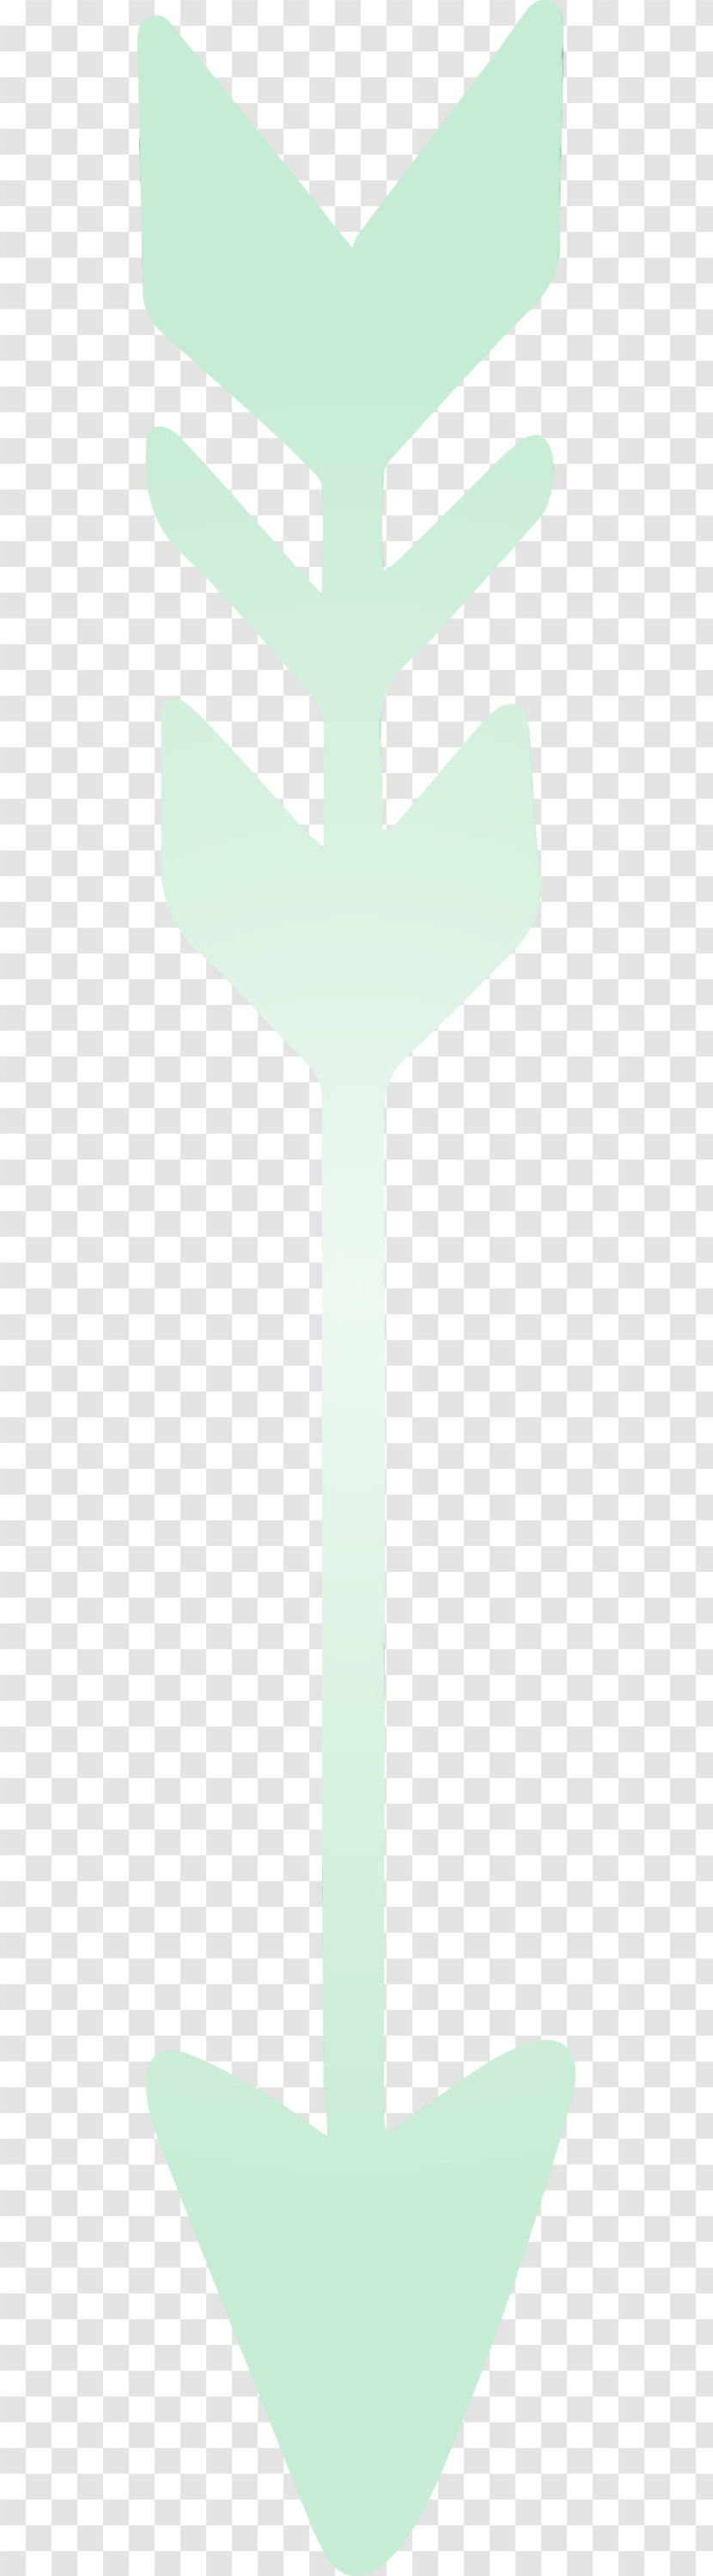 White Green Material Property Ceiling Transparent PNG